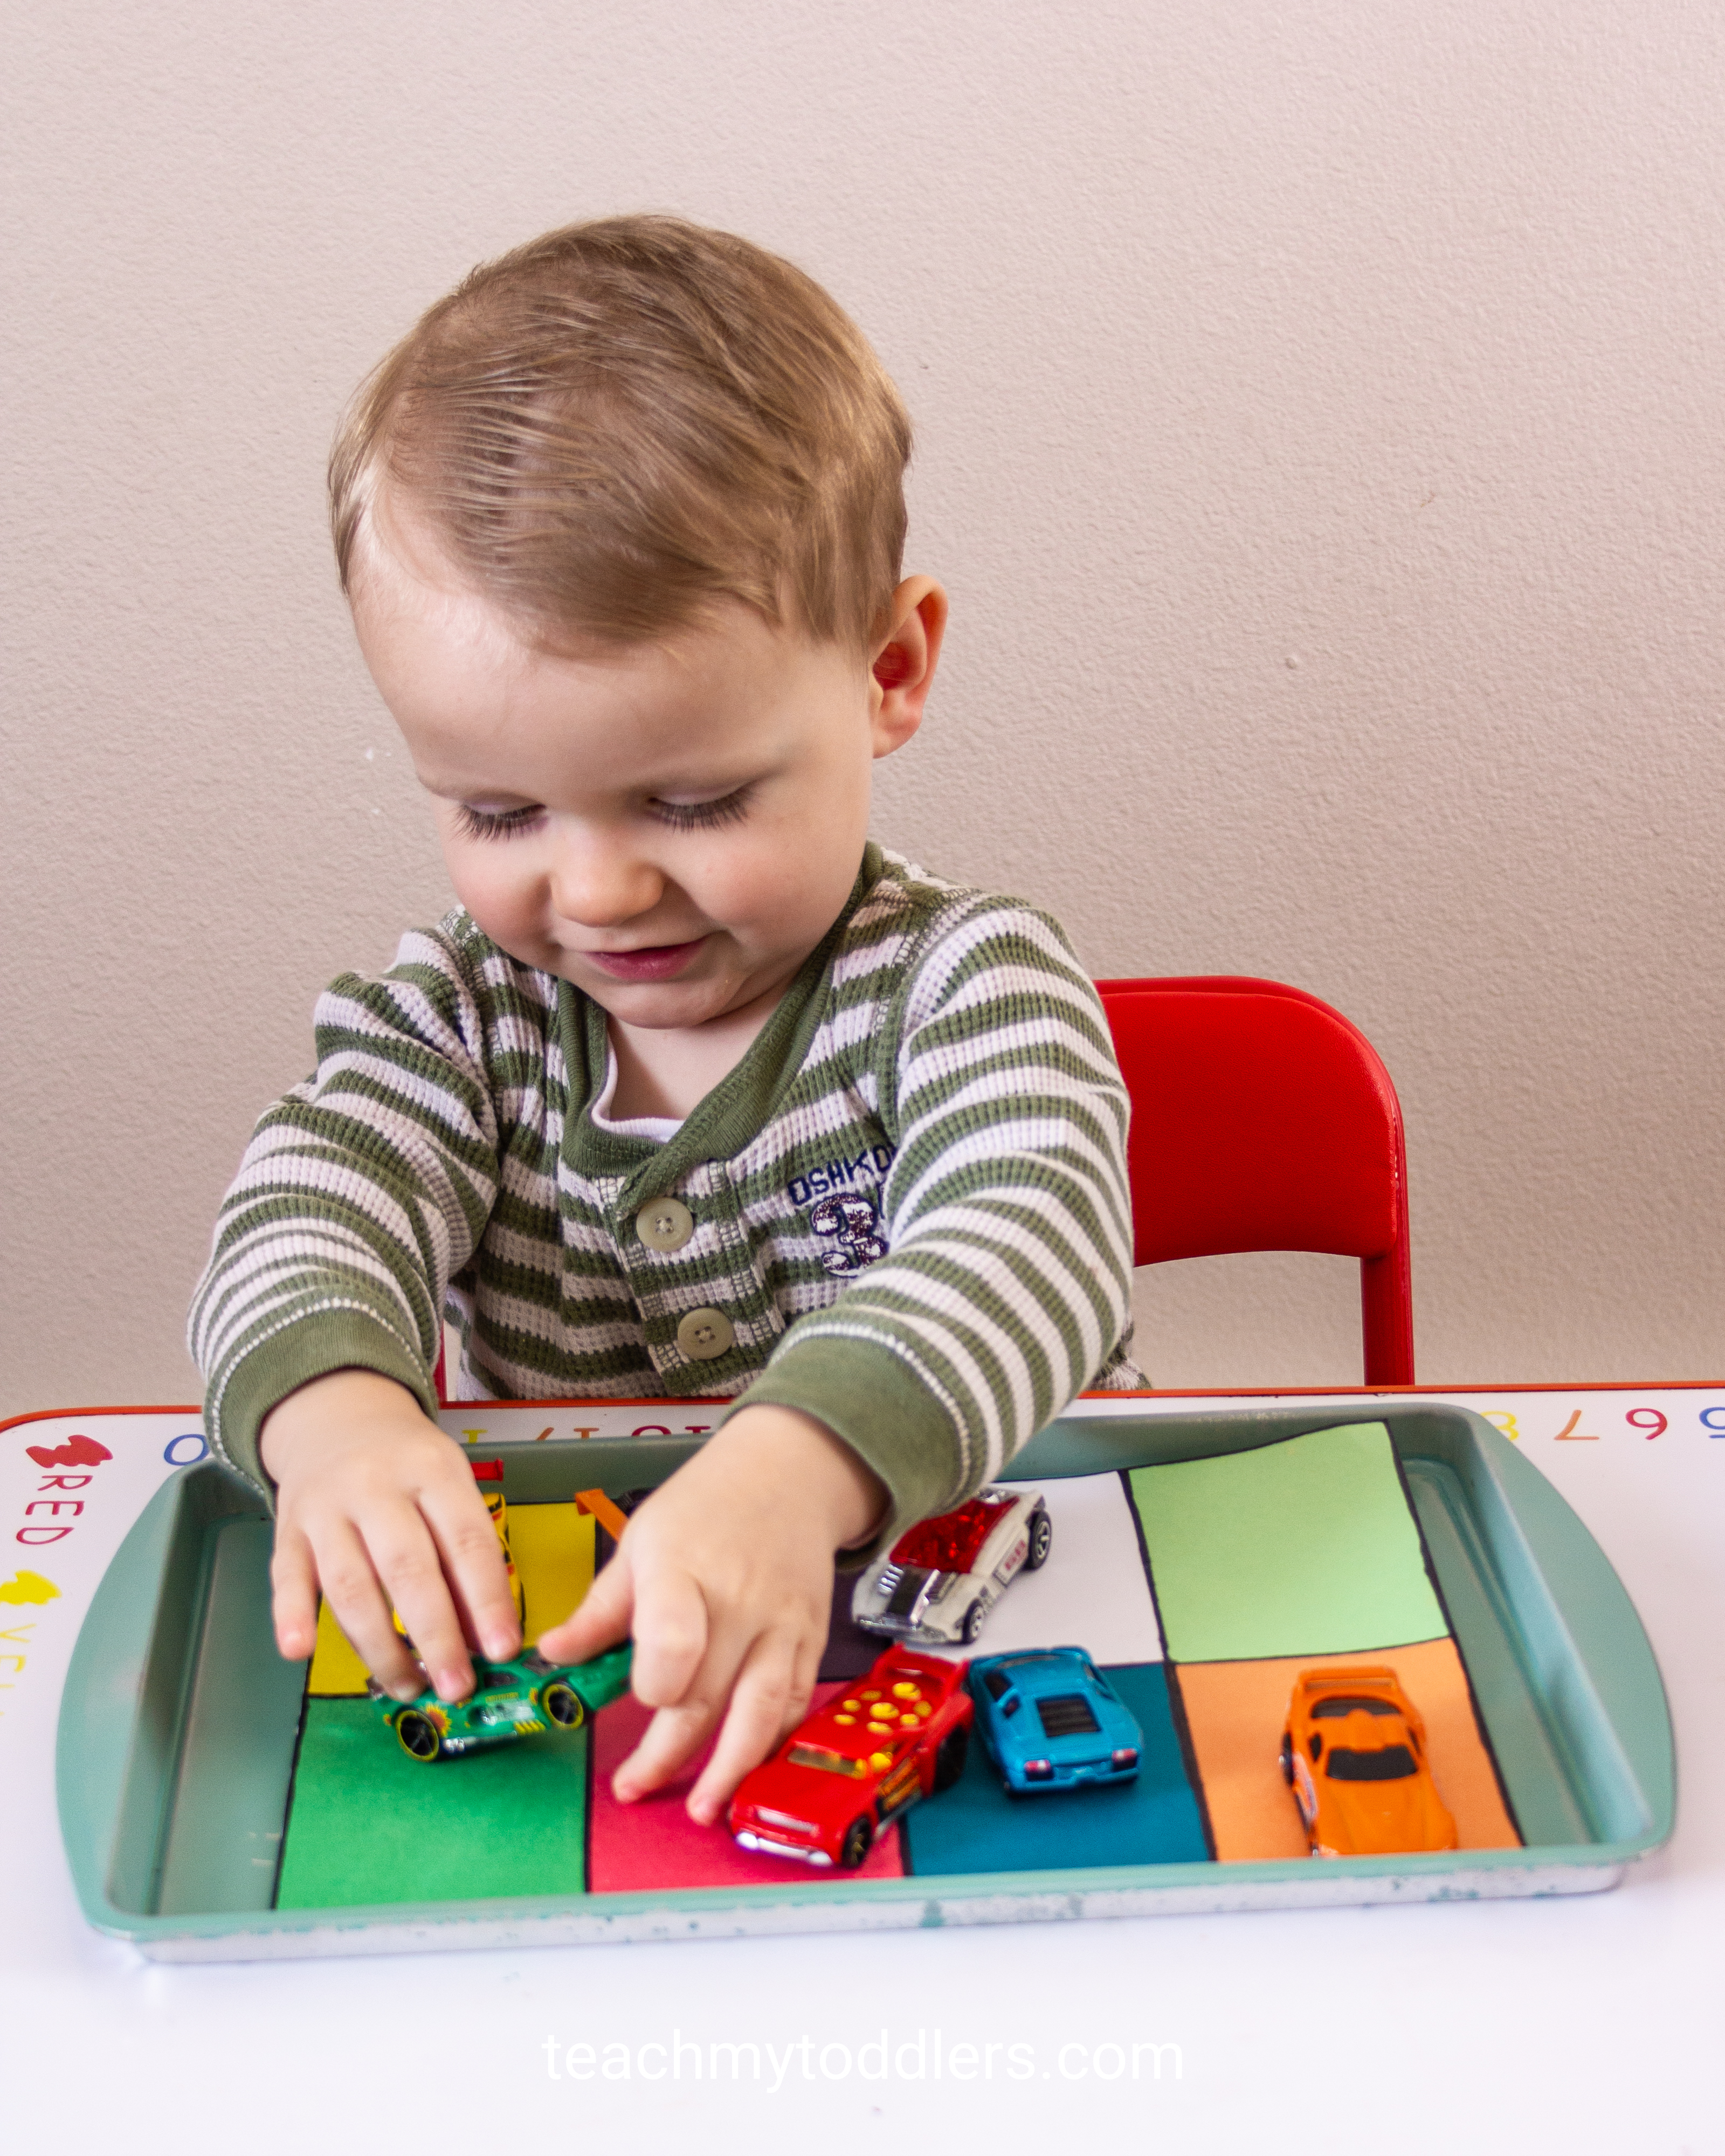 Use these awesome car activities to teach your toddlers about cars